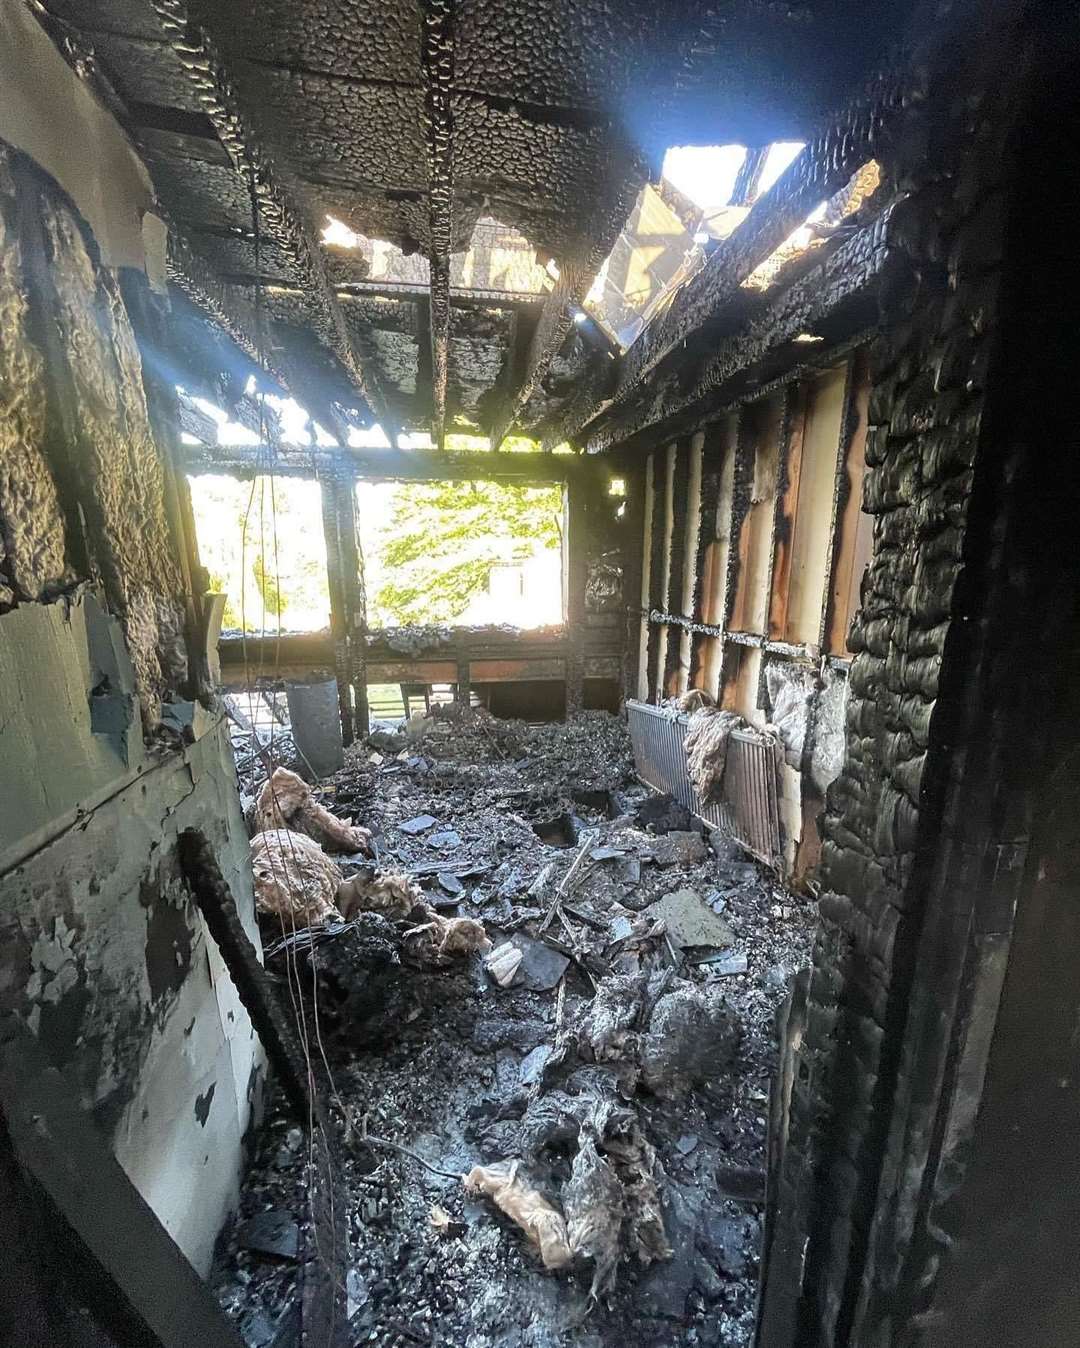 What is left of the bedroom where the blaze started